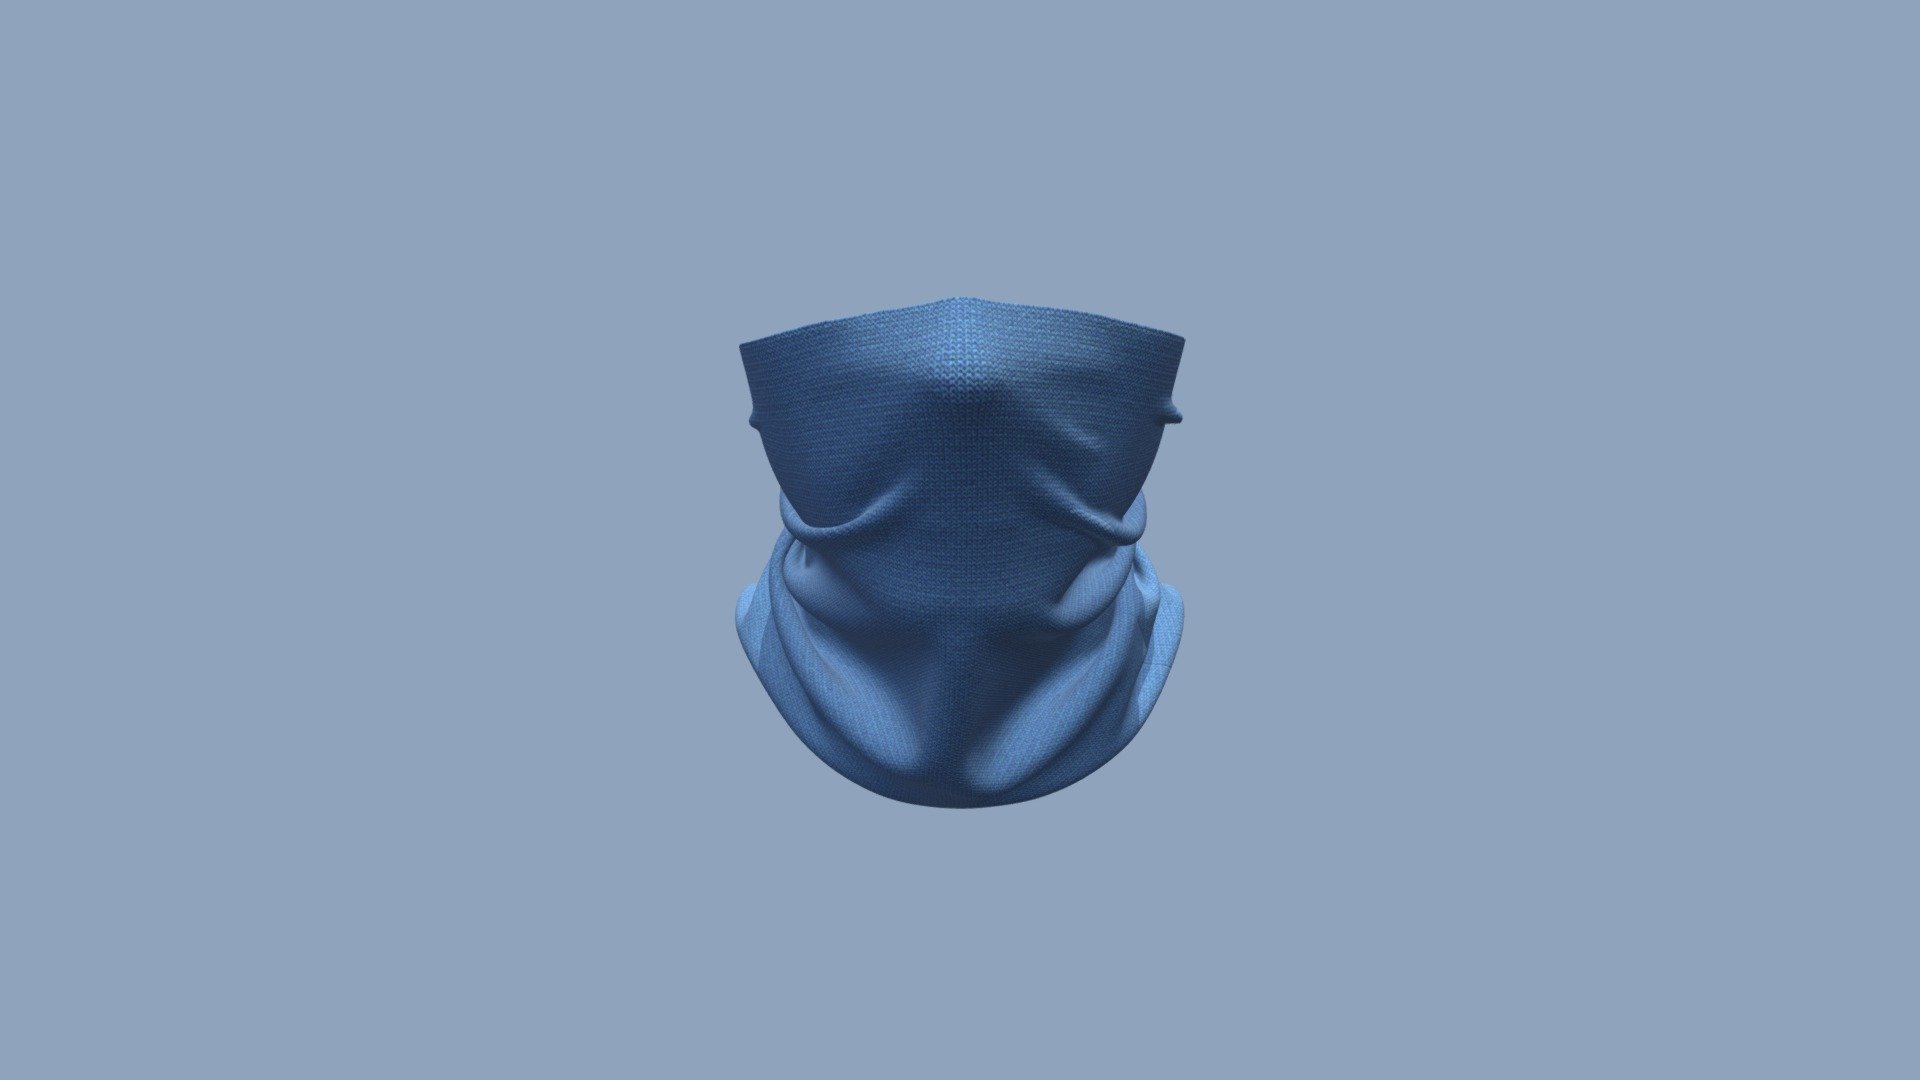 Cloth Title = Face Scarf Neck Gaiter Motorcycle And Cycling Face Mask 

SKU = DG100027 

Category = Unisex 

Product Type = Mask 

Cloth Length = Long 

Body Fit = Relaxed Fit 

Occasion = Protective Textile  


Our Services:

3D Apparel Design.

OBJ,FBX,GLTF Making with High/Low Poly.

Fabric Digitalization.

Mockup making.

3D Teck Pack.

Pattern Making.

2D Illustration.

Cloth Animation and 360 Spin Video.


We designed all the types of cloth specially focused on product visualization, e-commerce, fitting, and production. 

We will design: 

T-shirts 

Polo shirts 

Hoodies 

Sweatshirt 

Jackets 

Shirts 

TankTops 

Trousers 

Bras 

Underwear 

Blazer 

Aprons 

Leggings 

and All Fashion items. 




Our goal is to make sure what we provide you, meets your demand 3d model